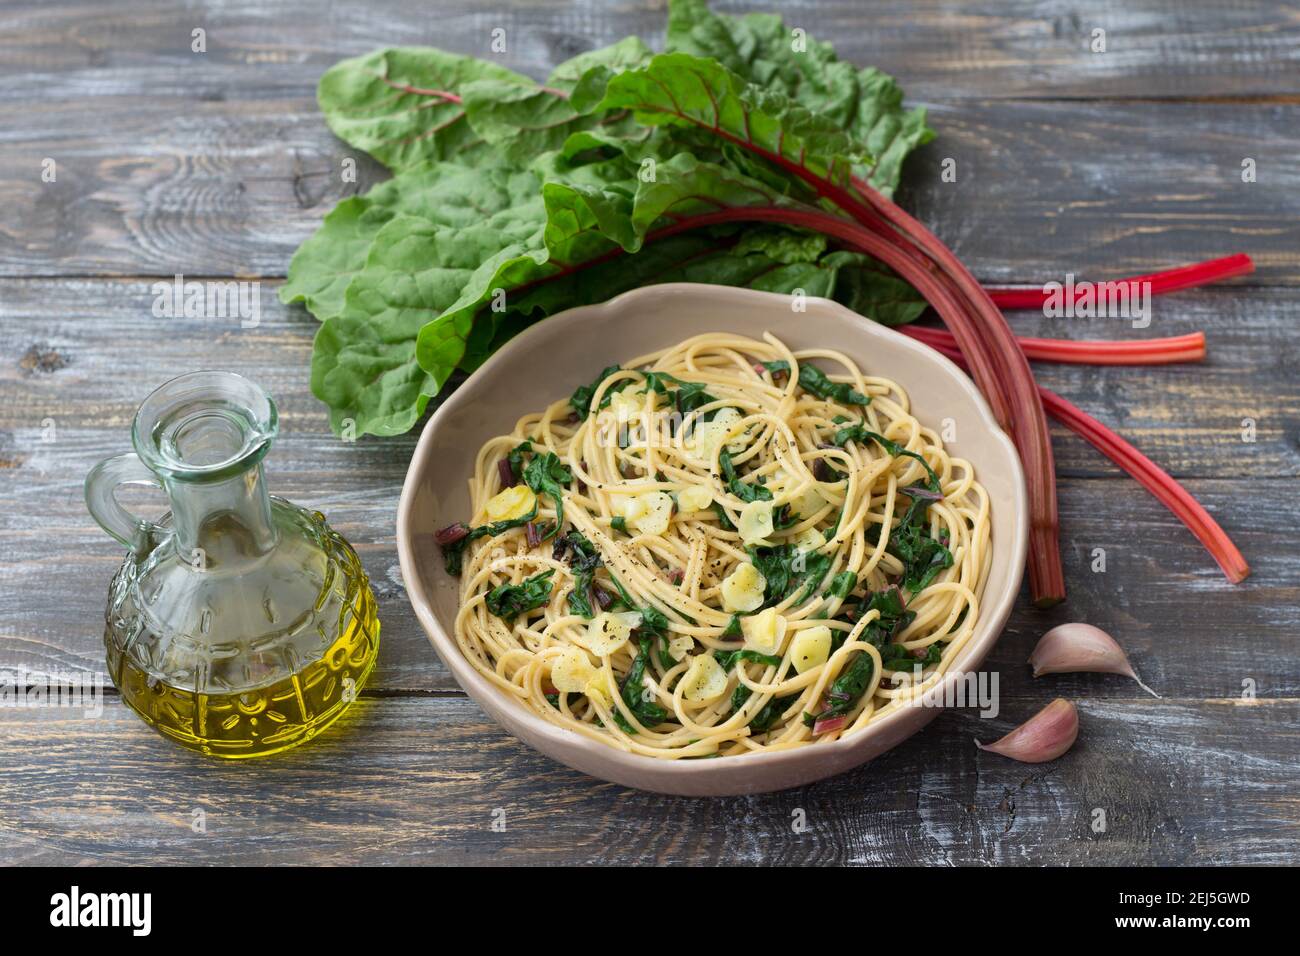 Vegan spaghetti with chard and garlic on a wooden table. Delicious homemade food Stock Photo